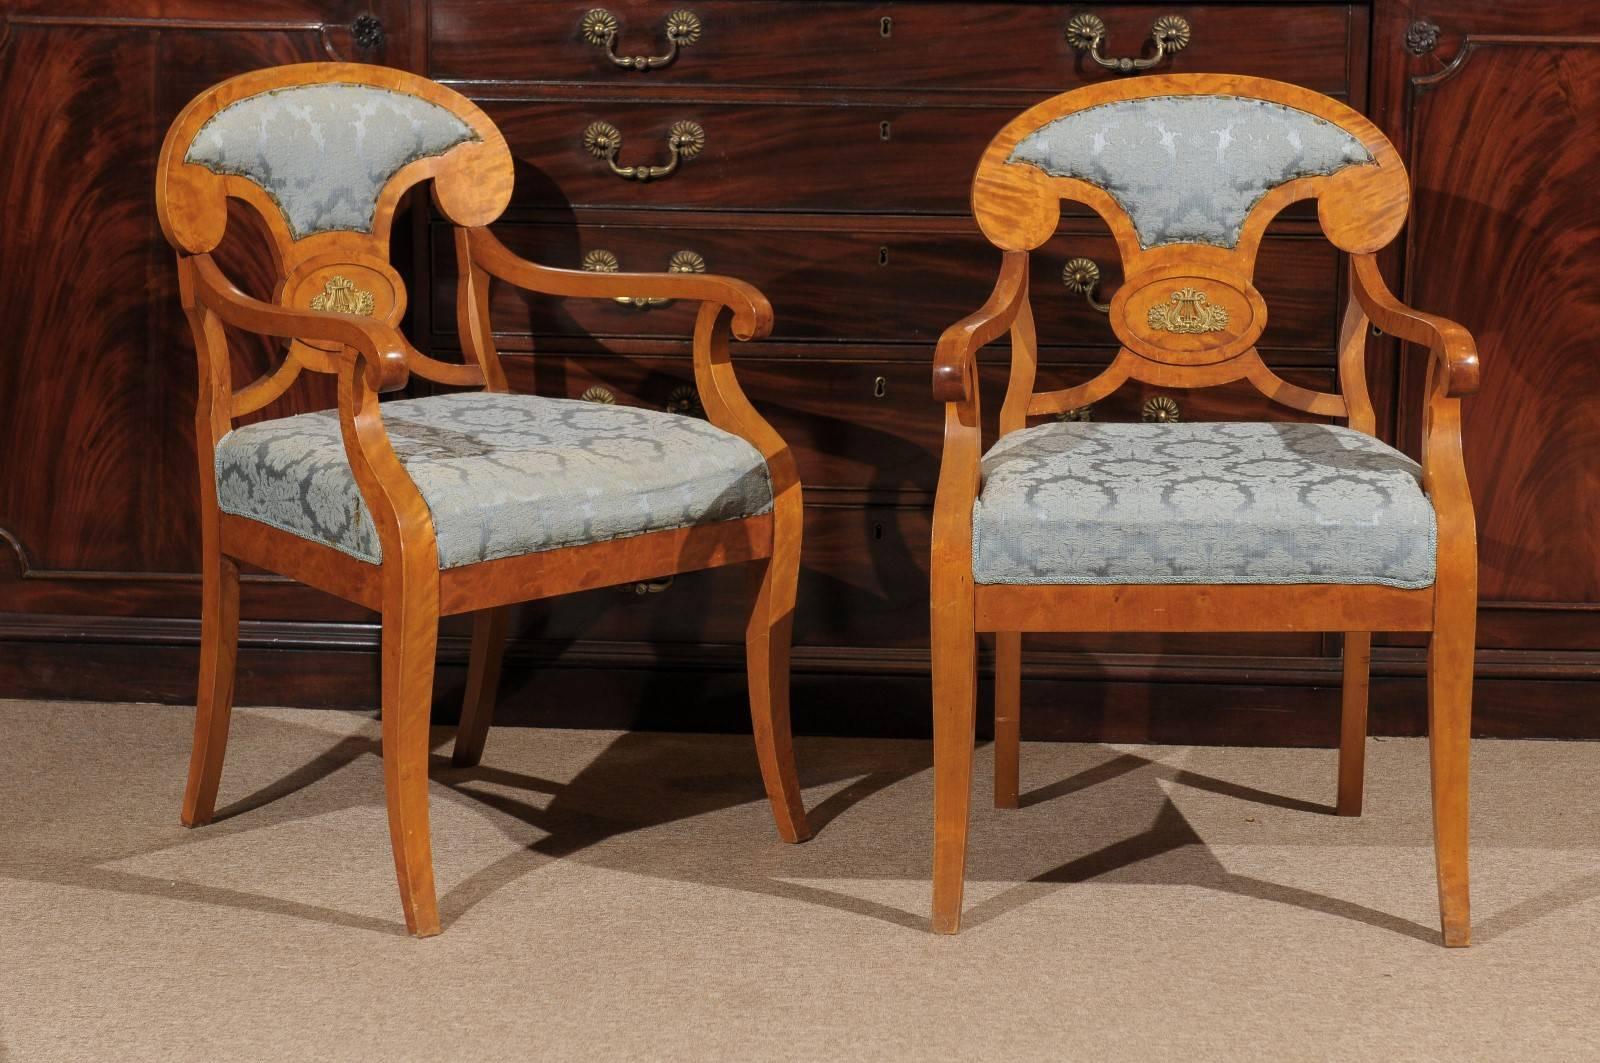 Pair of Biedermeier Style armchairs in maple, first quarter of 20th century.